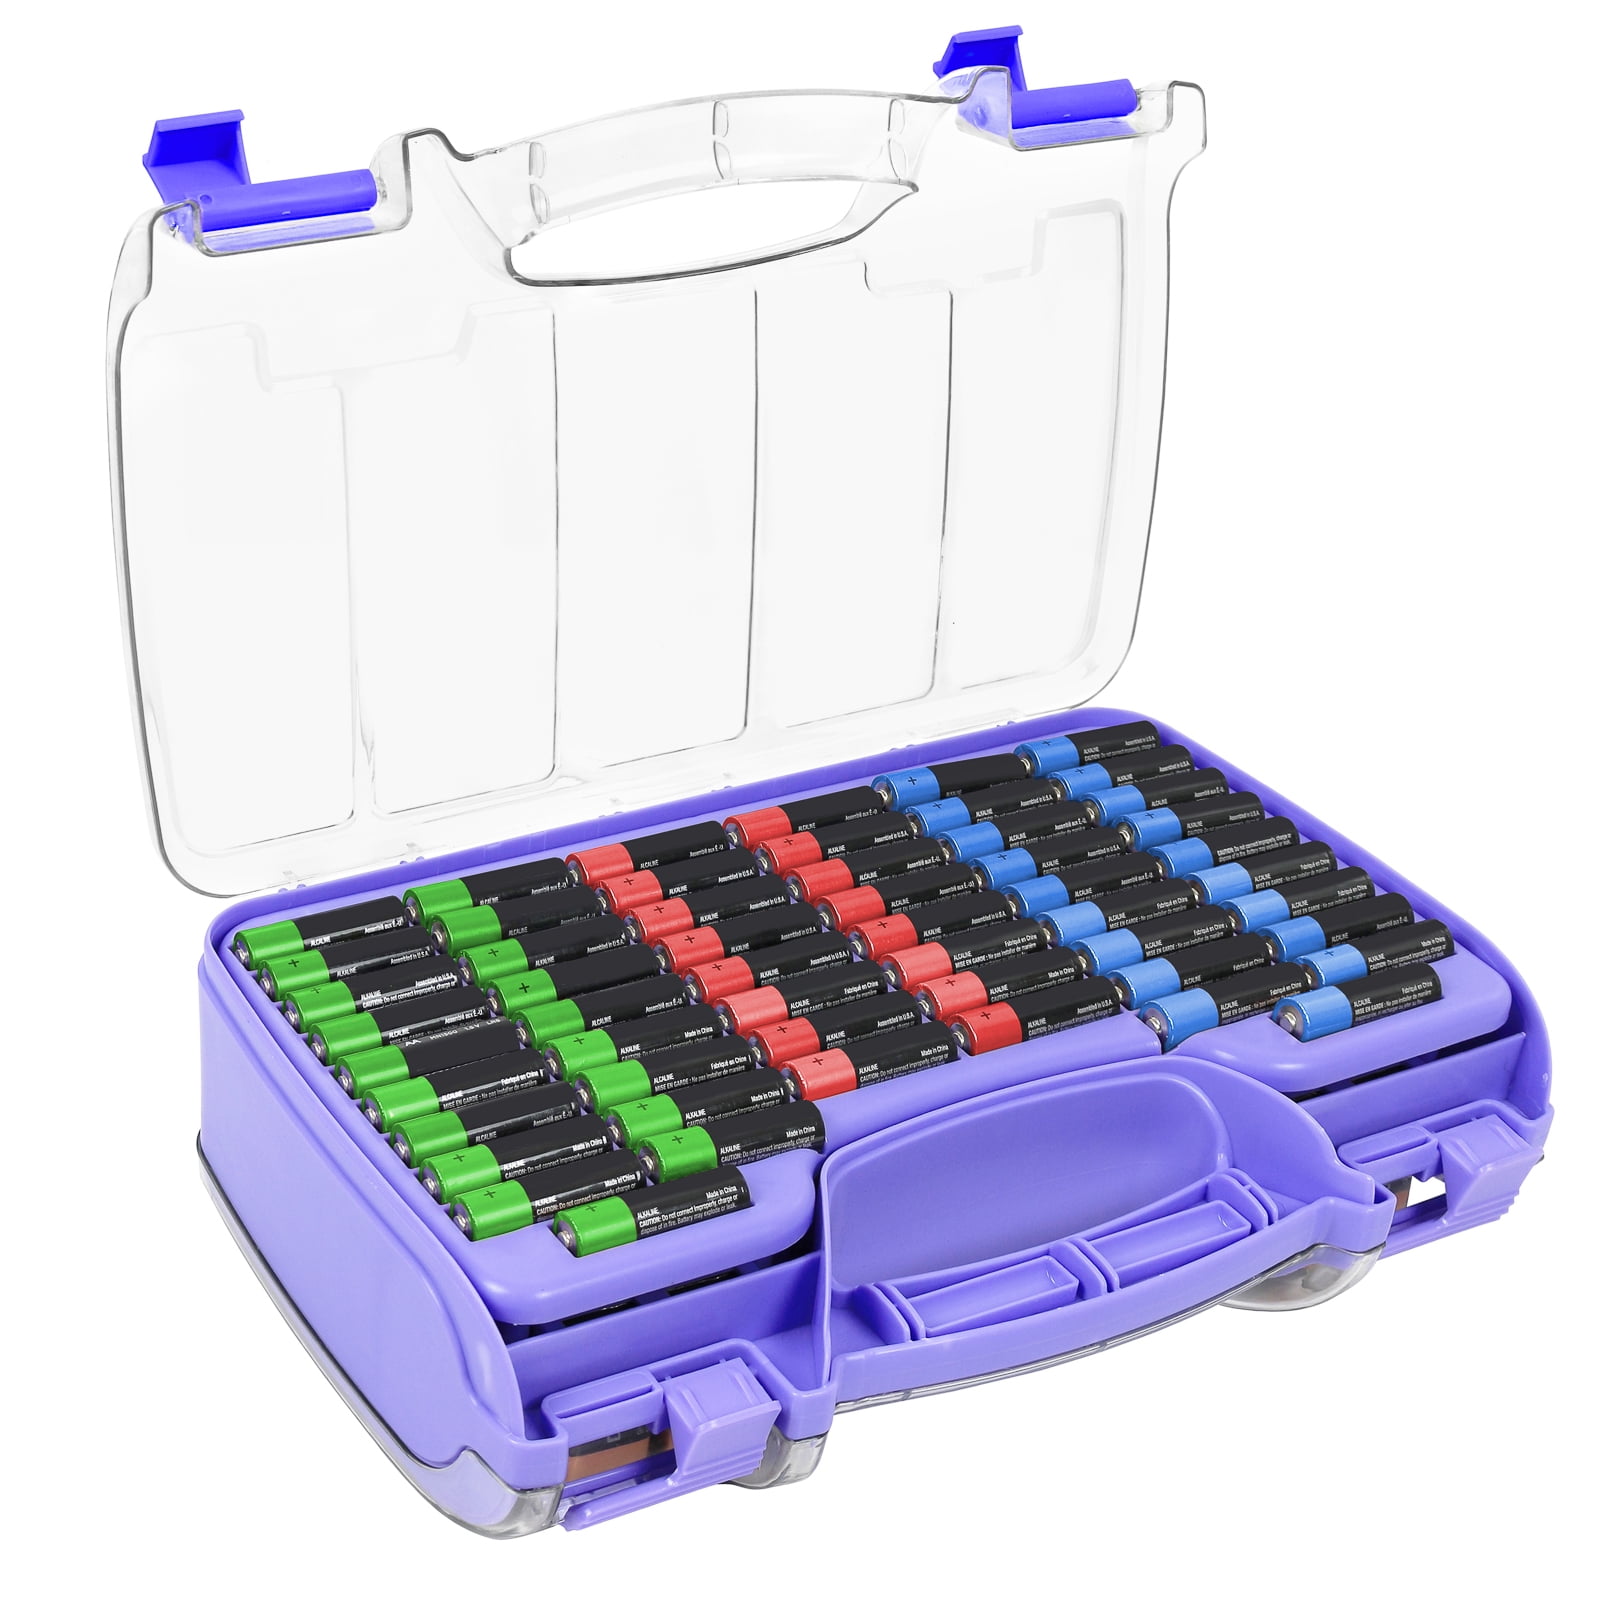 Clear Battery Case The Battery Organizer Storage Case with Tester Battery Holder for 180 Batteries of Various Sizes Battery Storage Organizer Cocoa 